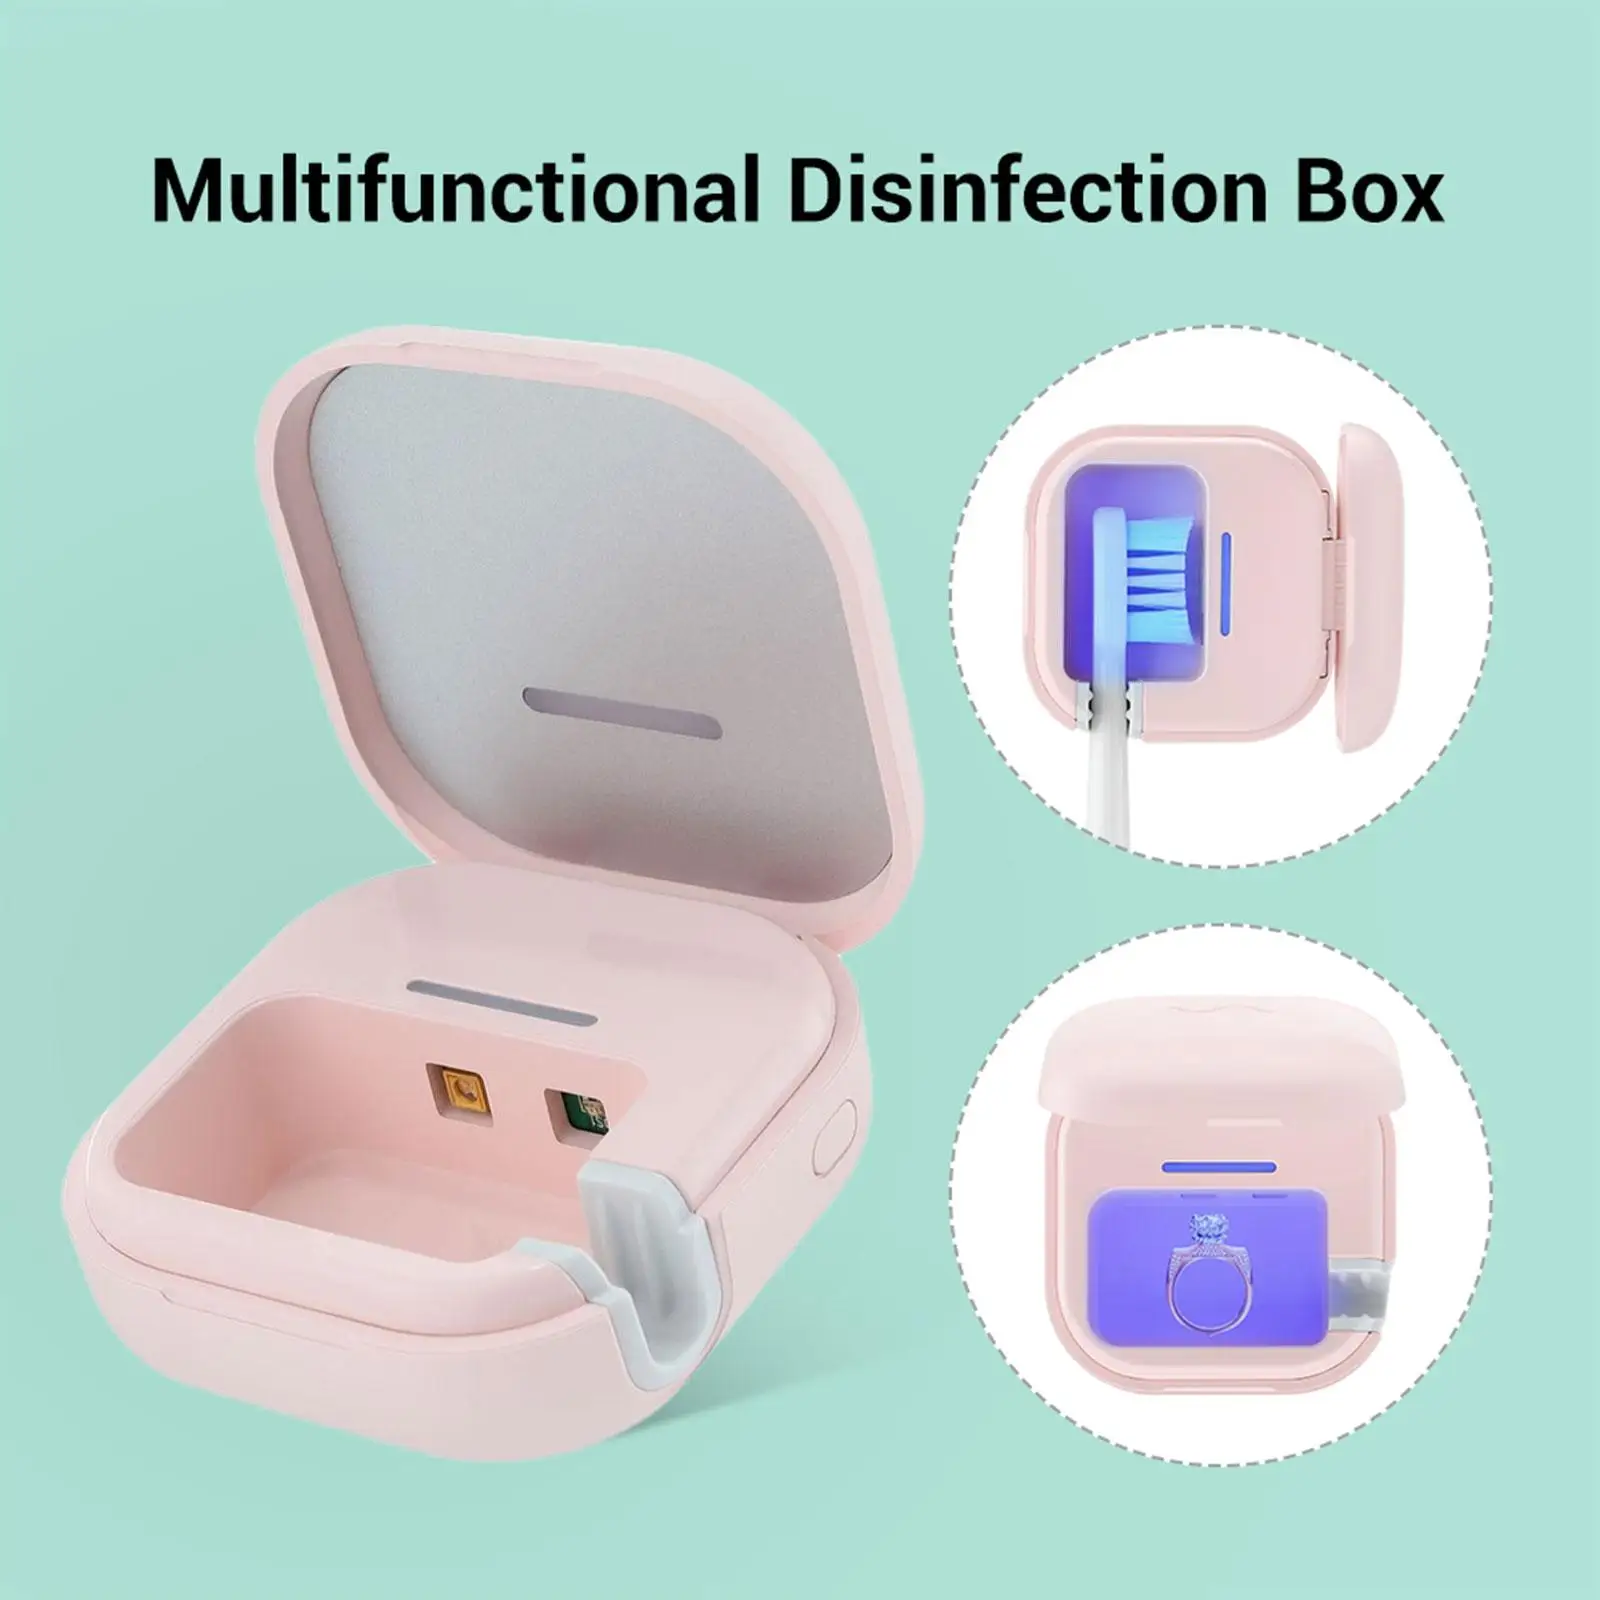 UV Toothbrush Sterilization Box UV Light Automatic Portable Toothbrush Holder for Traveling Electric Manual Toothbrushes Jewelry